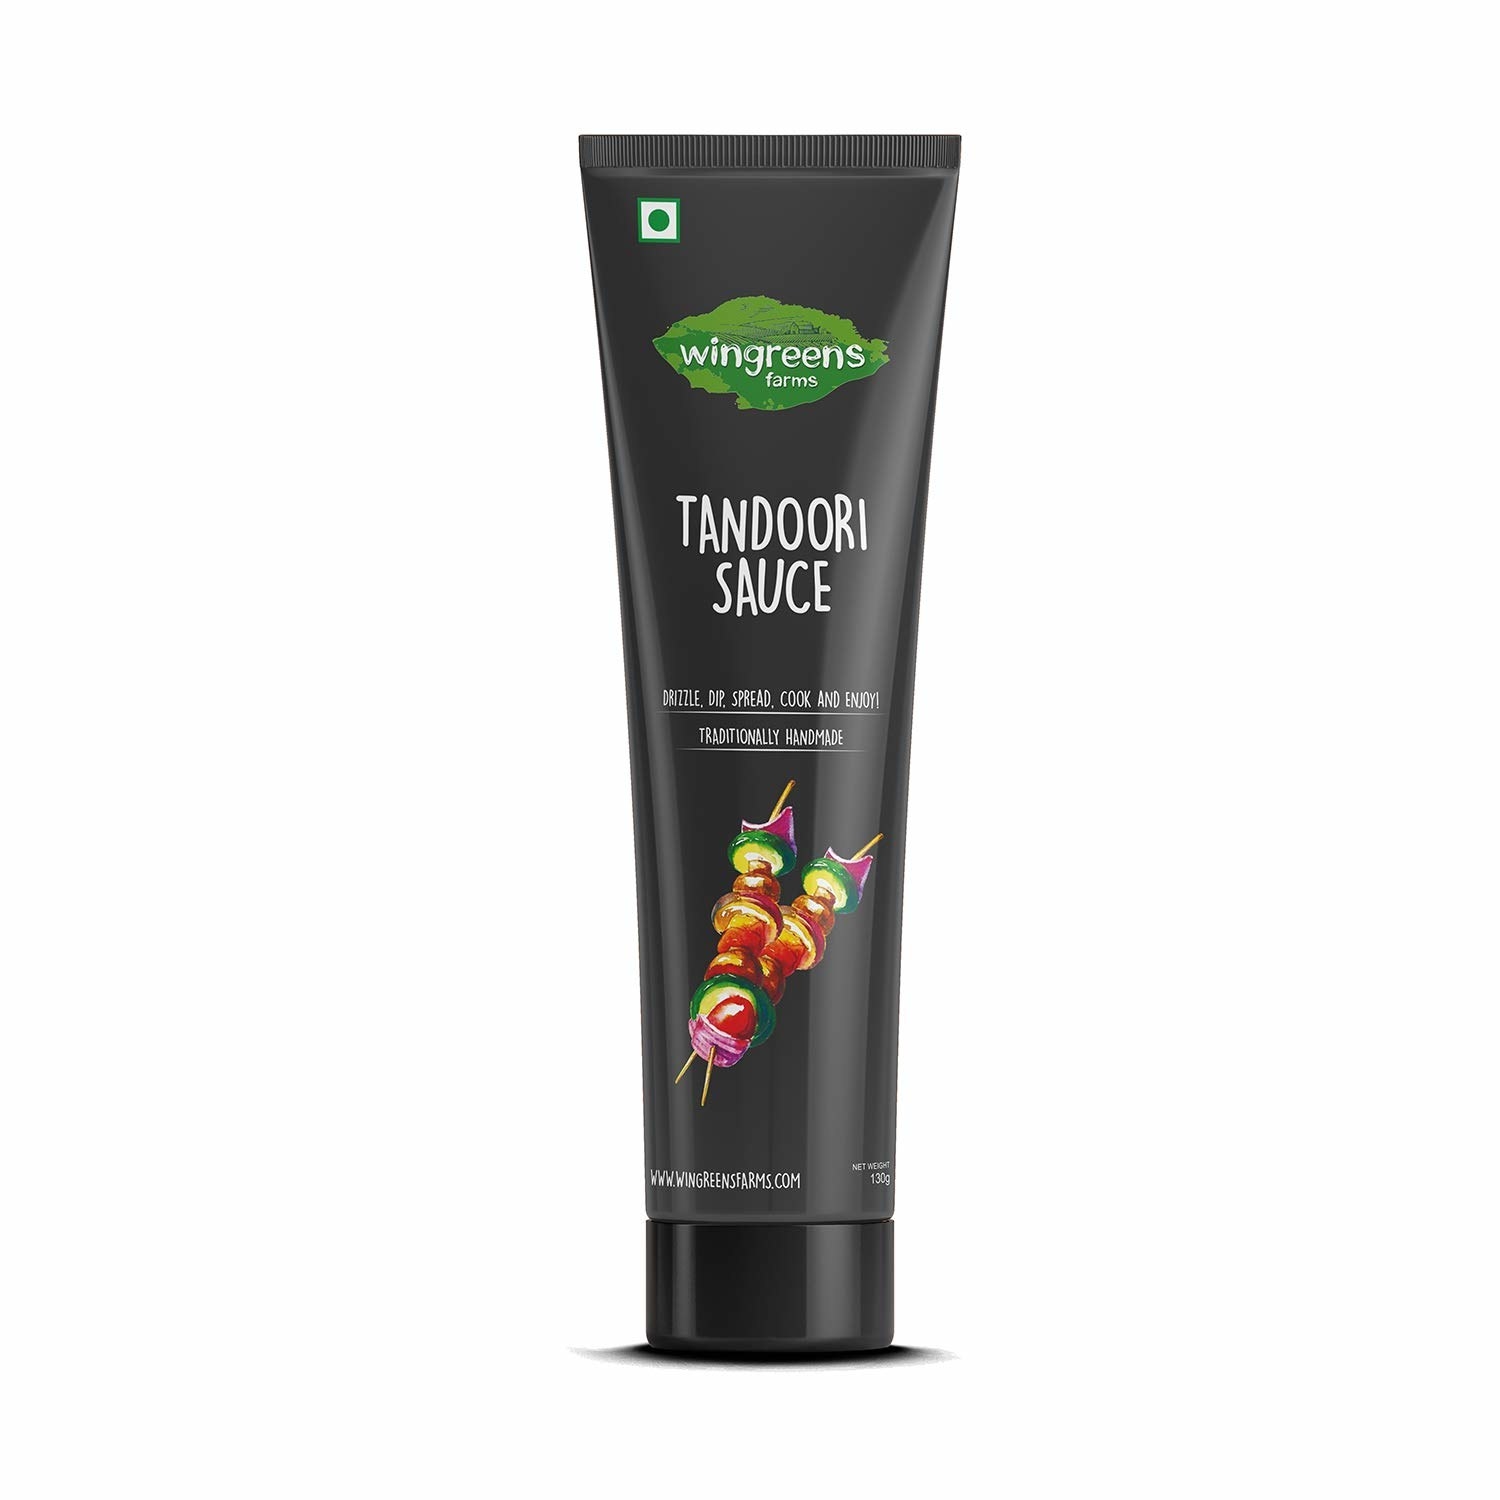 Packaging of the tube of the tandoori sauce